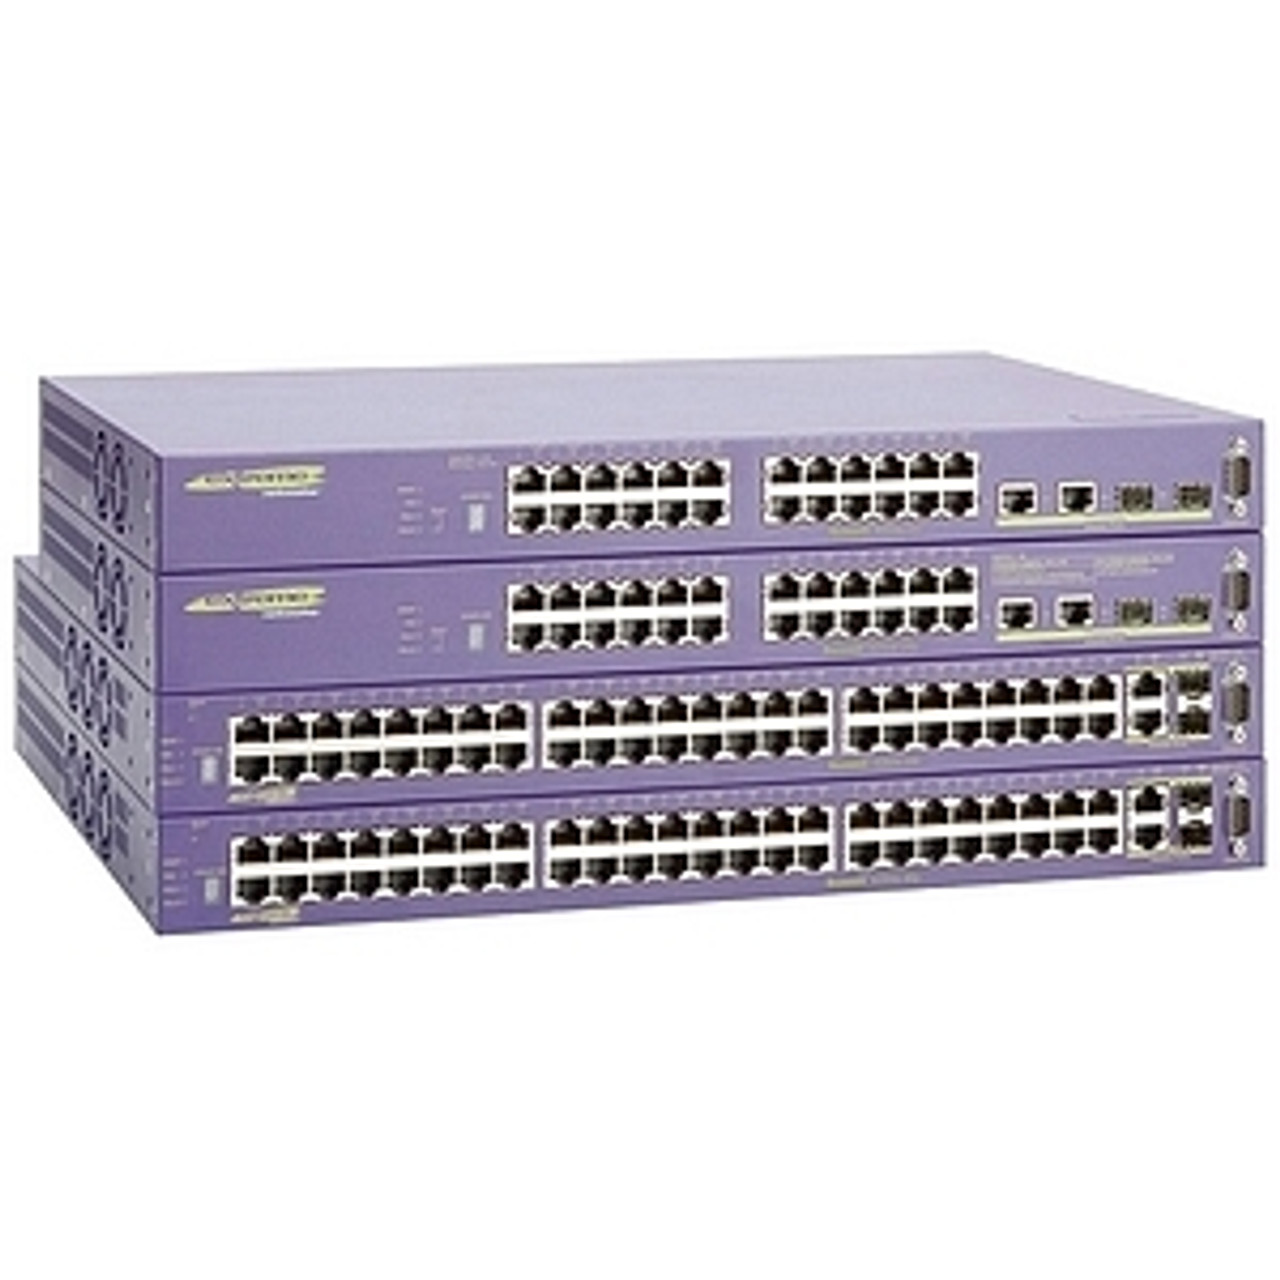 15107 Extreme Networks Summit X250e-48p 48-Ports Stackable Multilayer Ethernet Switch with PoE 48 x 10/100Base-TX, 2 x 10/100/1000Base-T, 2 x